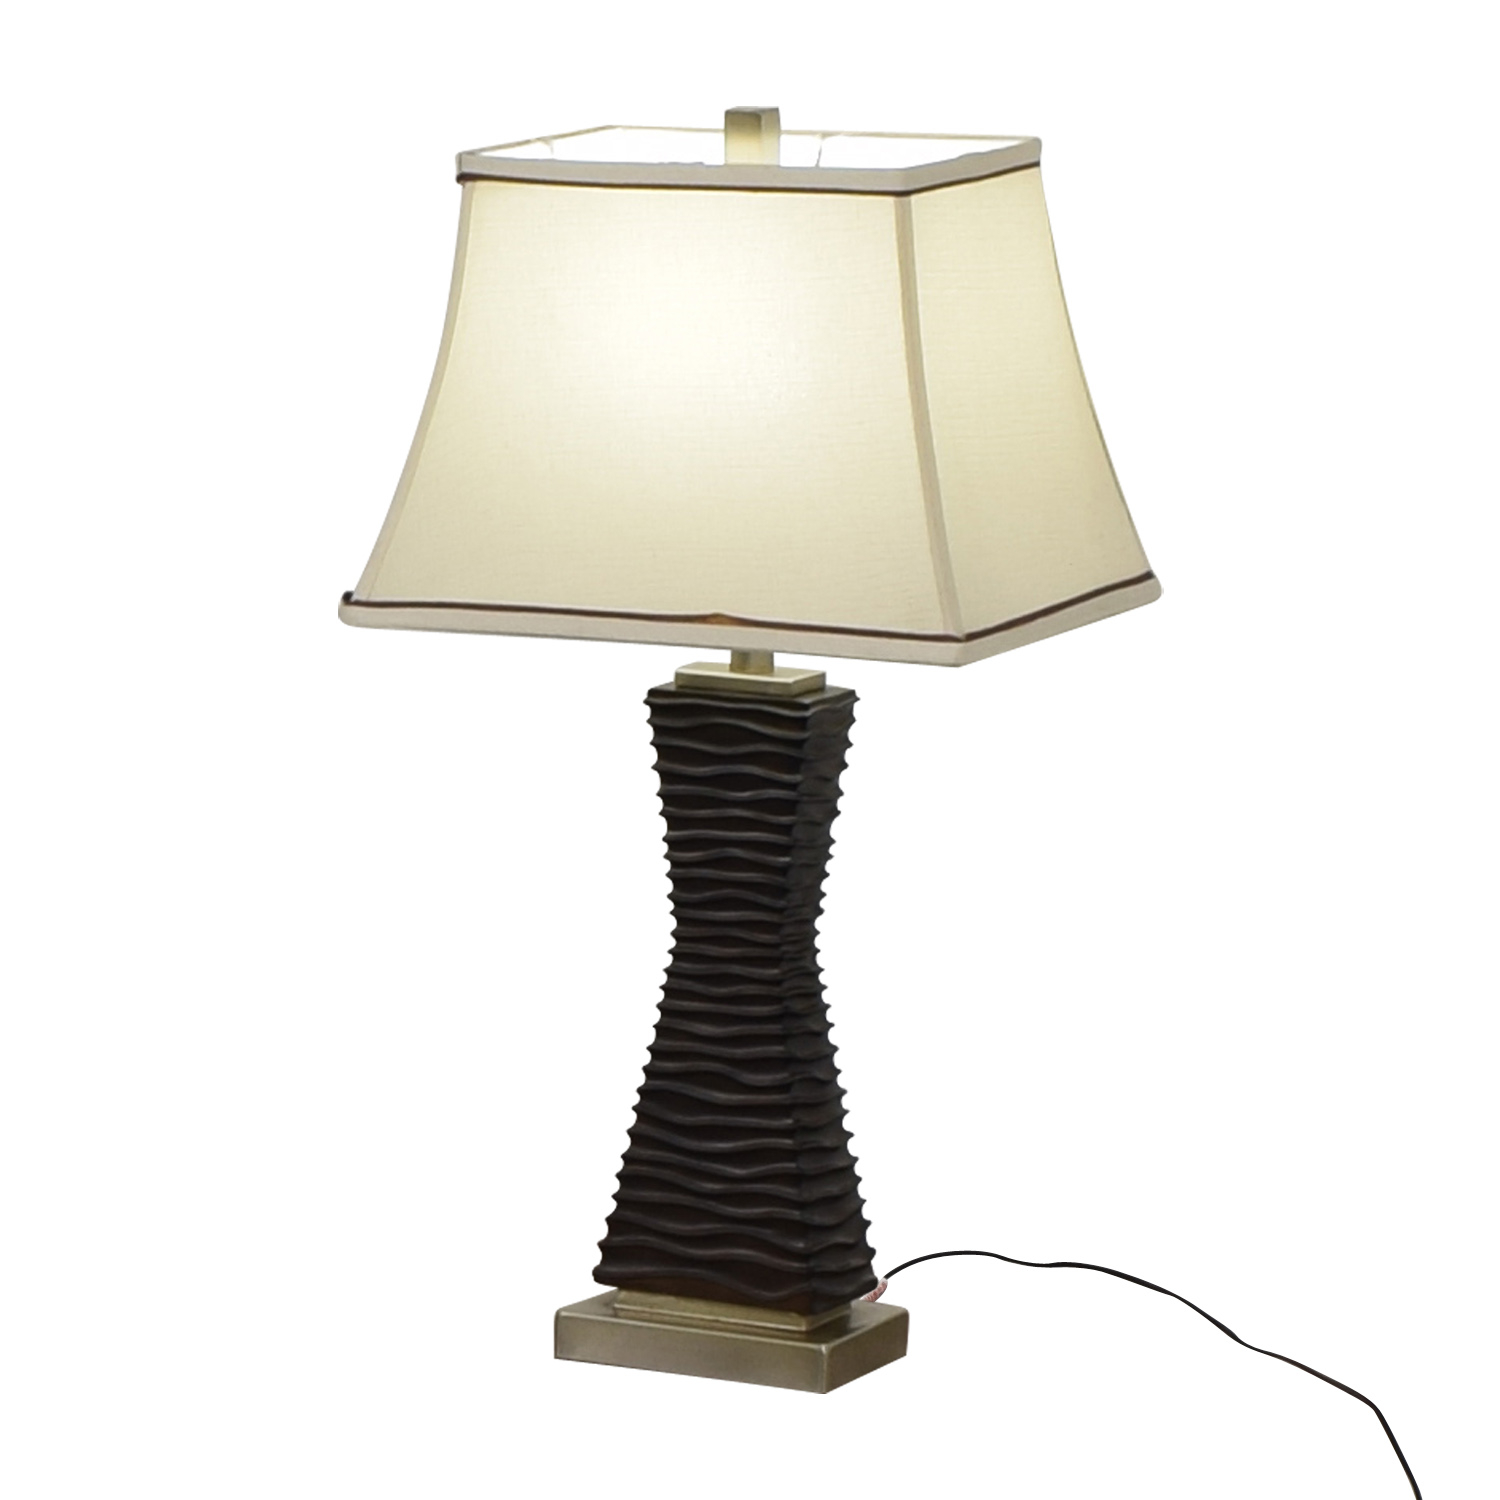 36 Off Raymour Flanigan Raymour Flanigan Table Lamp Decor for dimensions 1500 X 1500